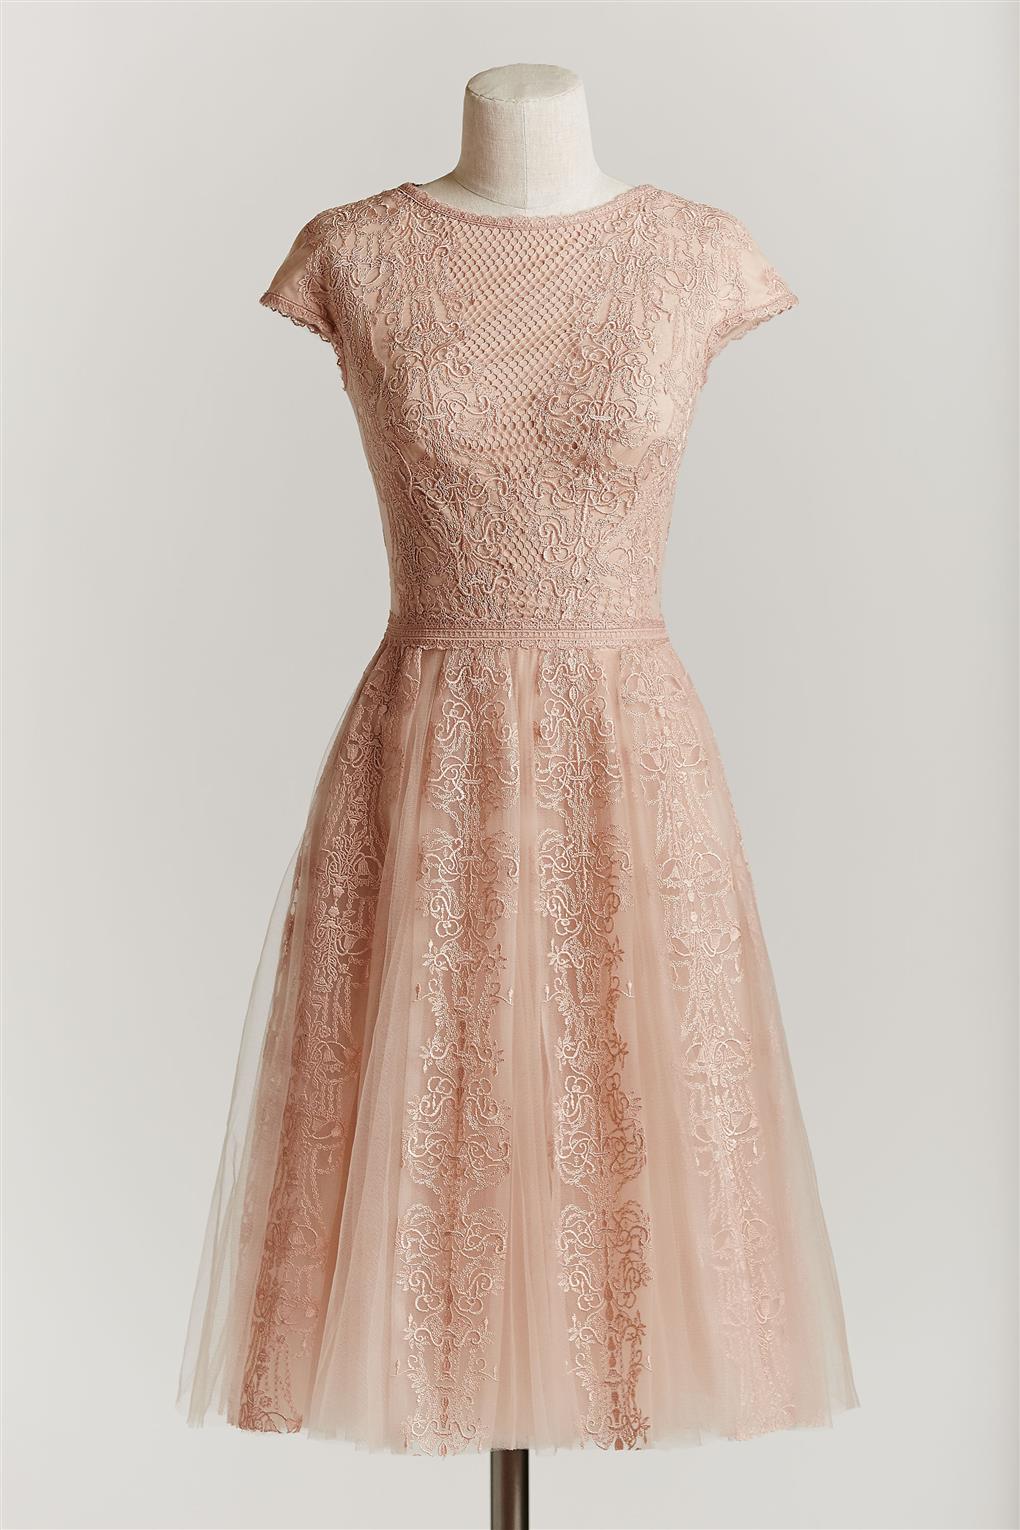 Amelia Bridesmaids Dress from BHLDN's Spring 2015 Collection